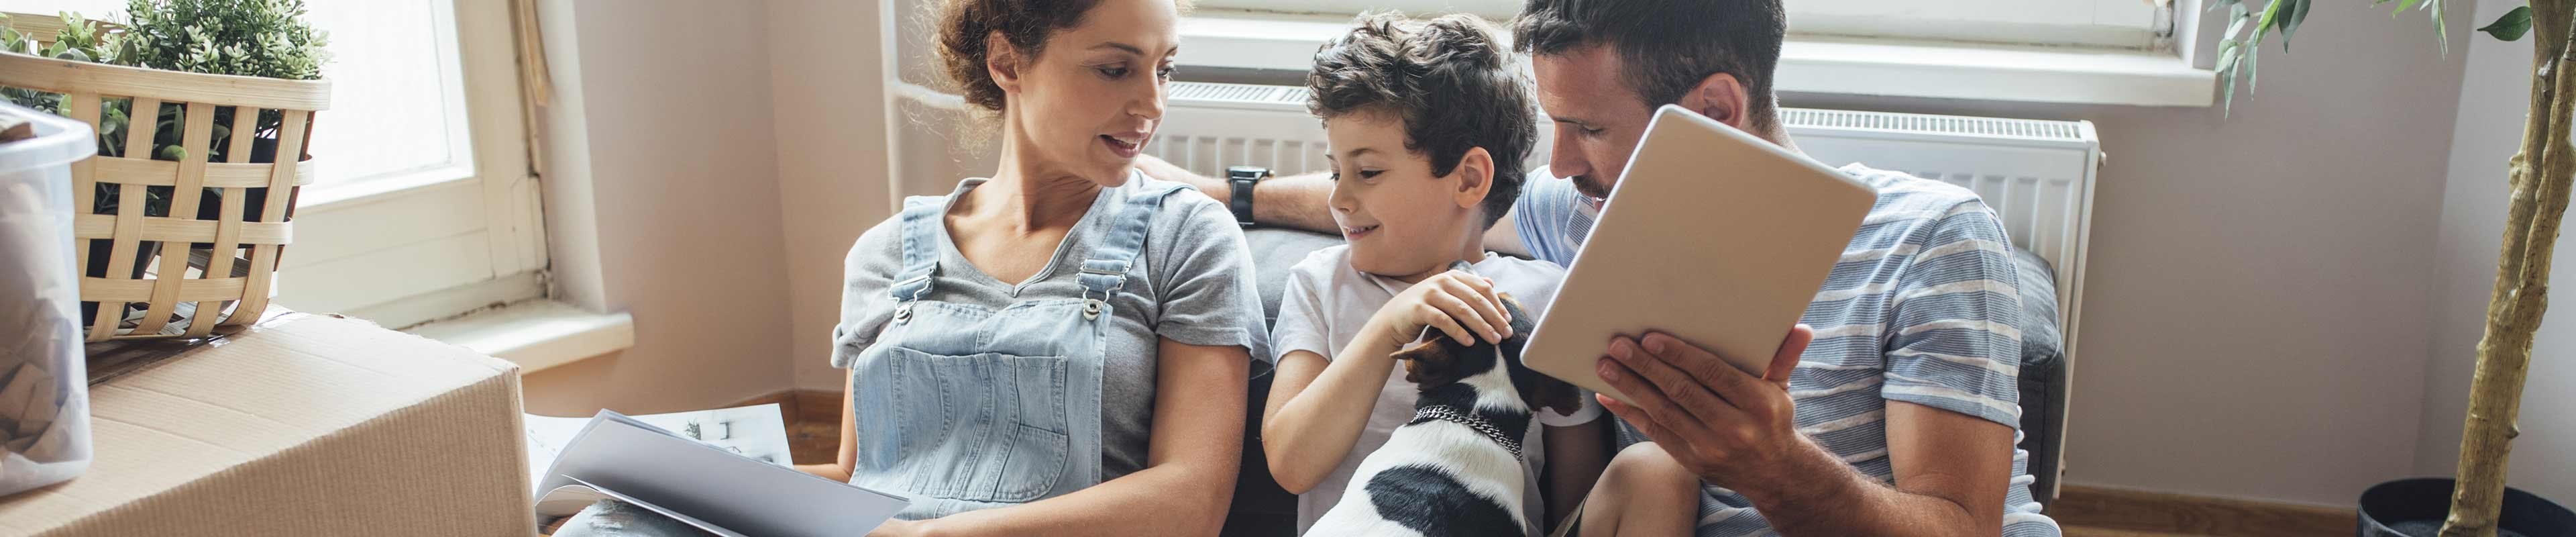 Family of three with dog learning about dog bite insurance.